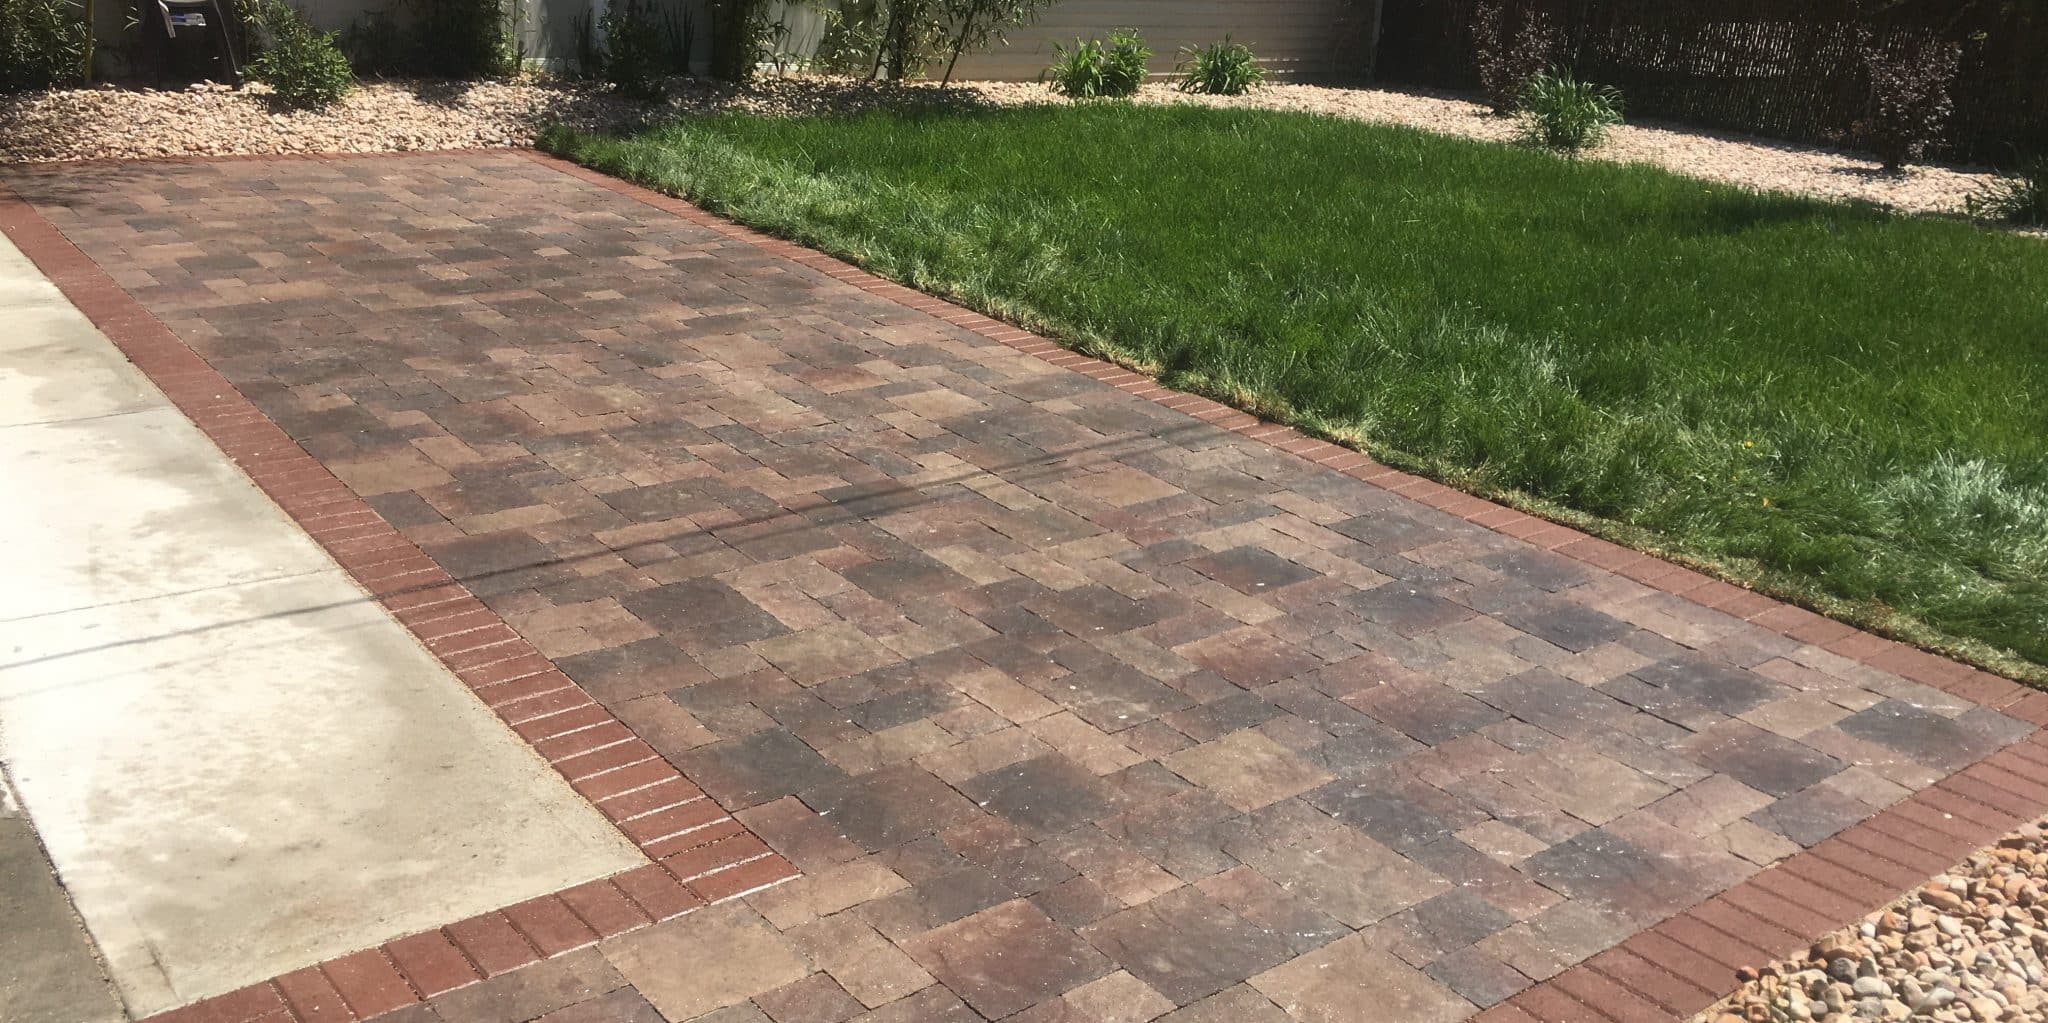 Newly installed paver patio